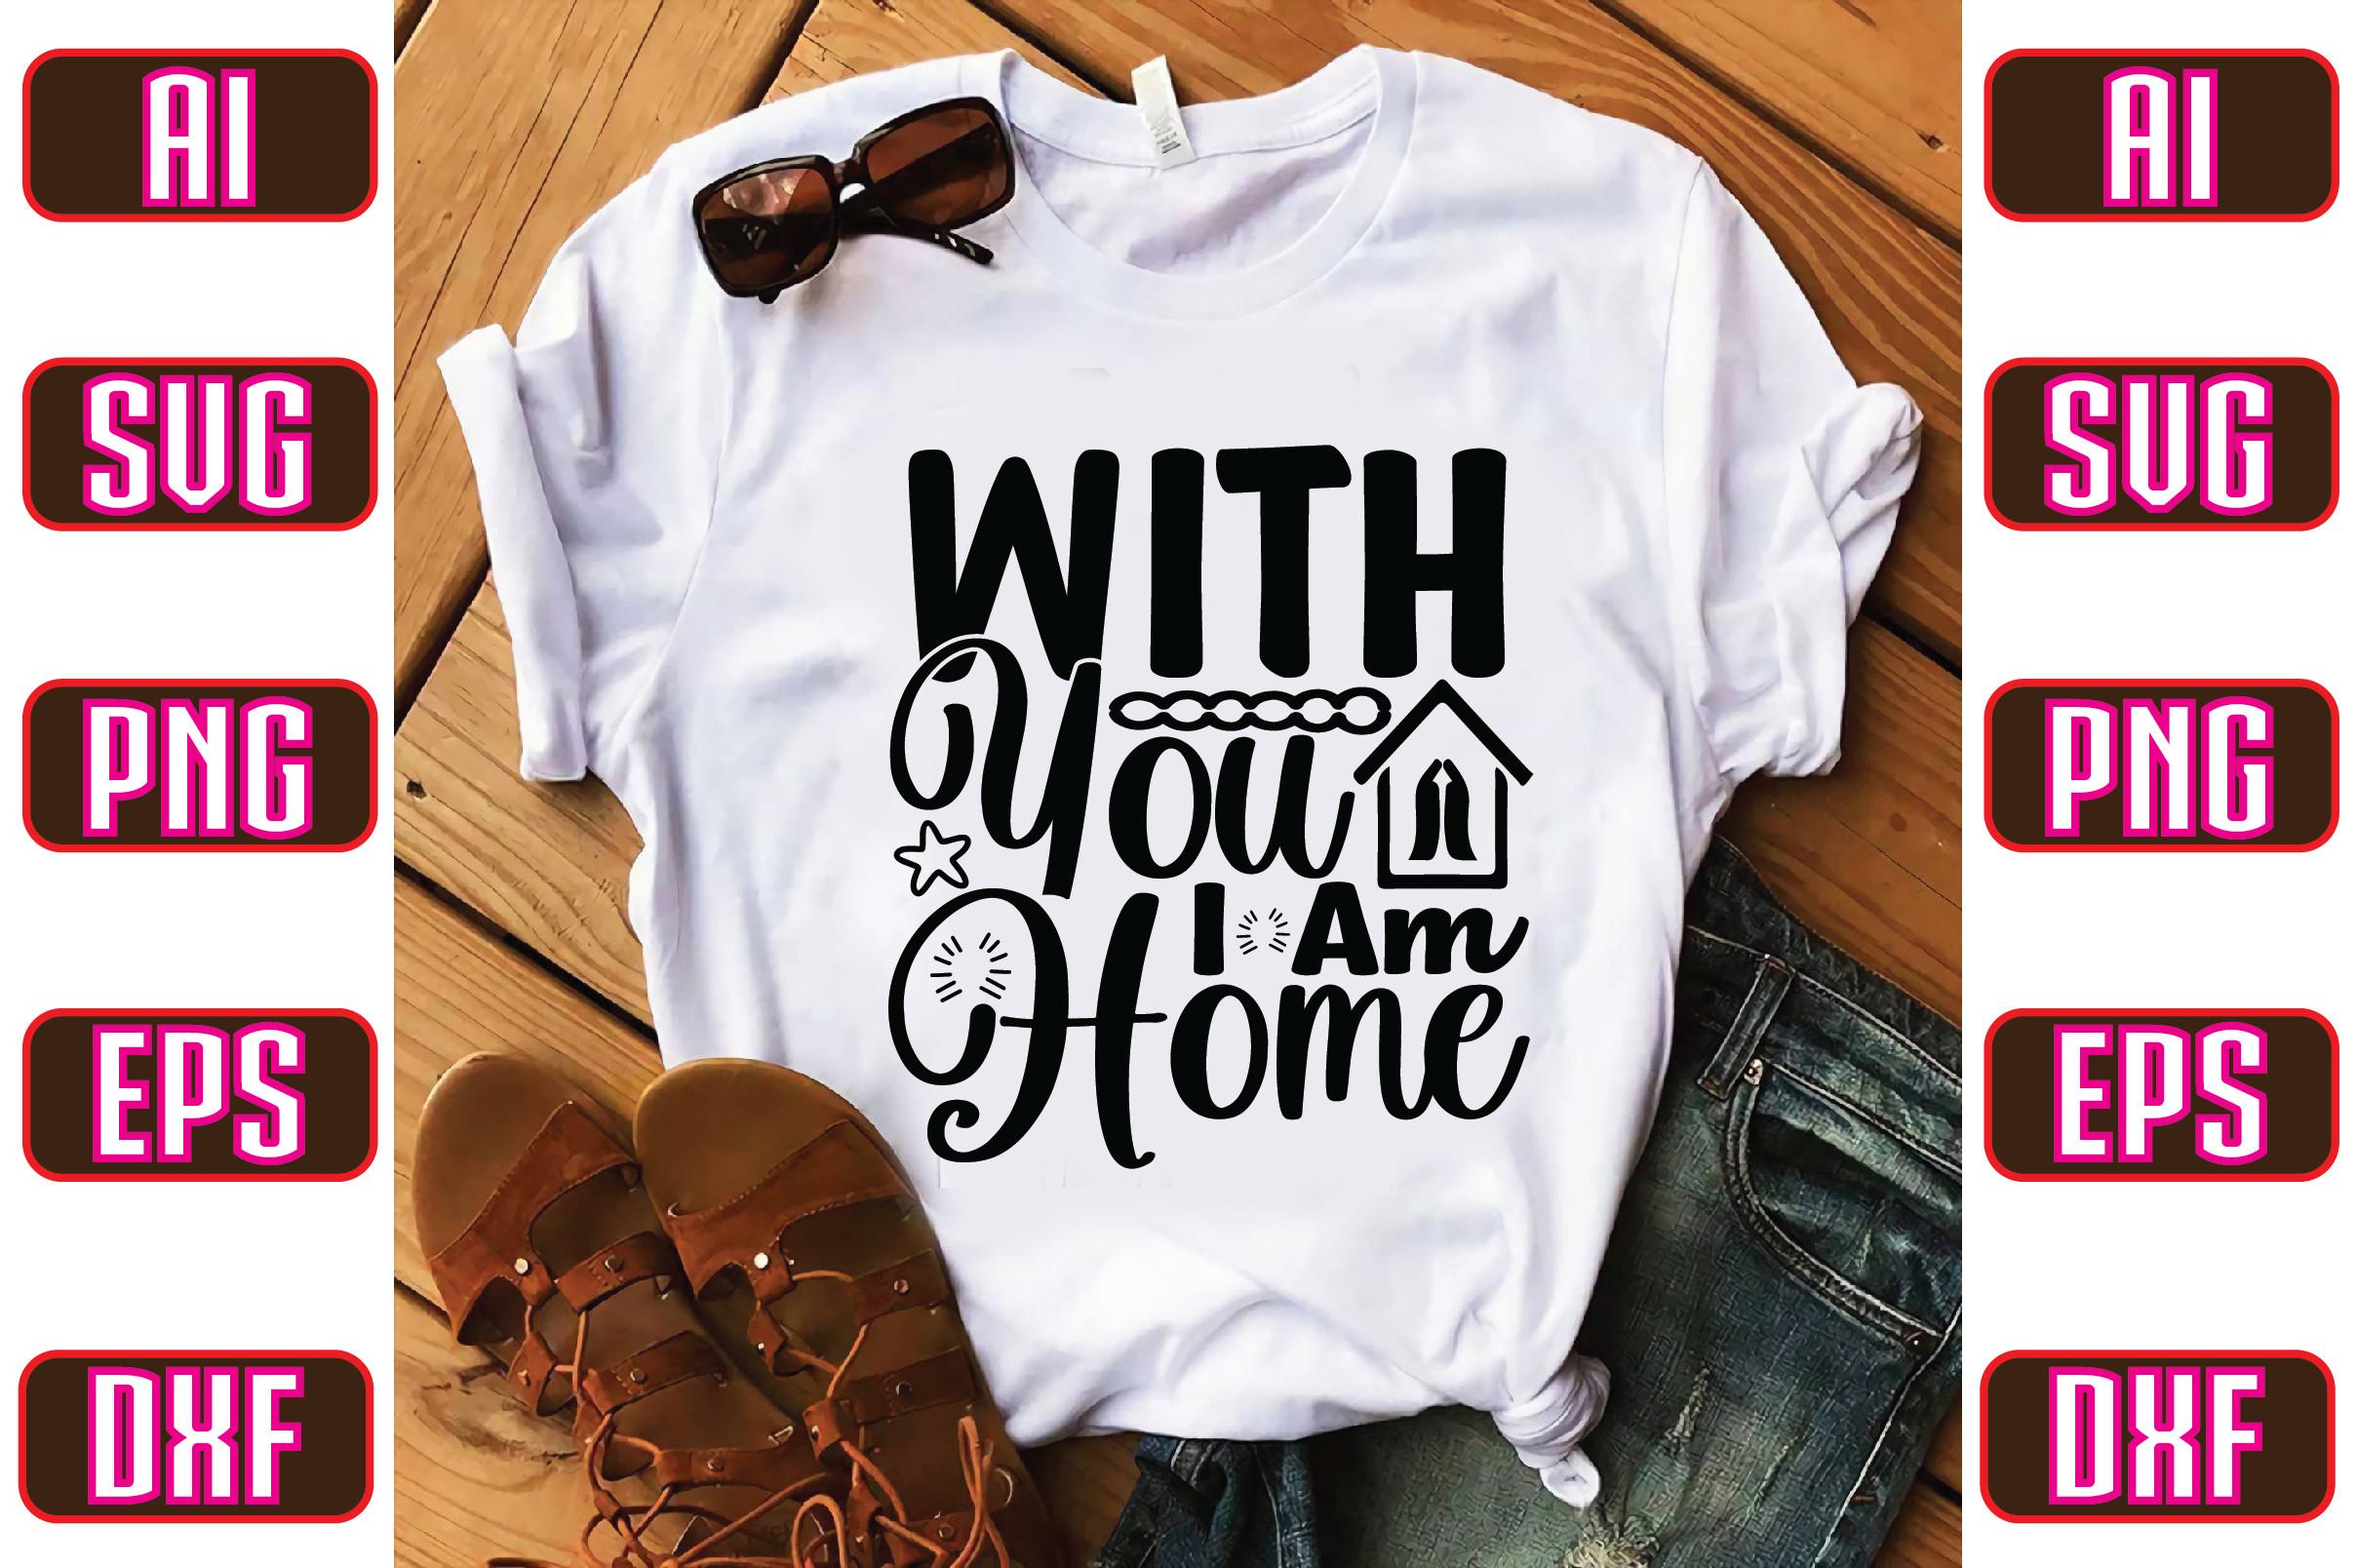 With You I Am Home